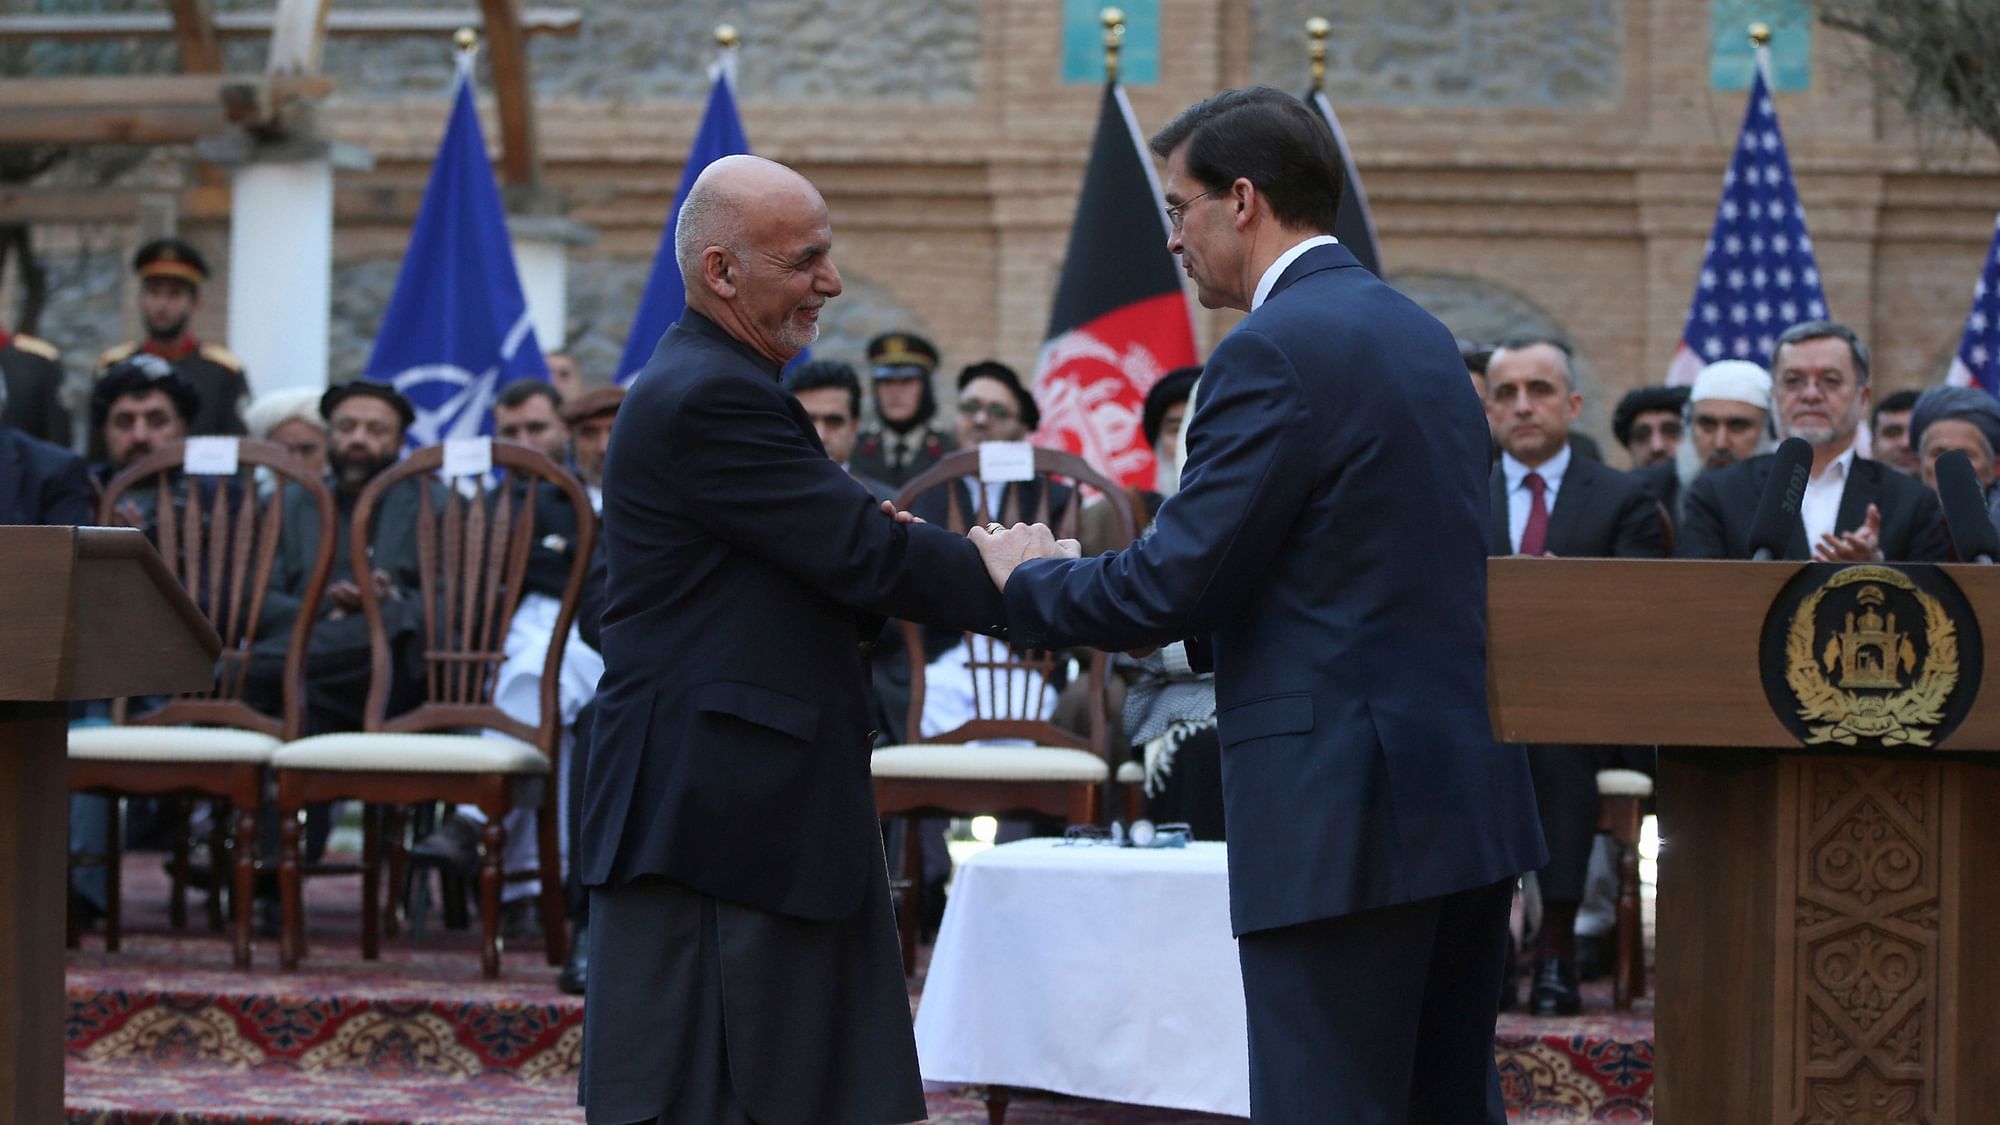 Afghan President Ashraf Ghani shakes hands with US Secretary of Defense Mark Esper after a joint news conference in presidential palace in Kabul on 29 February.&nbsp;